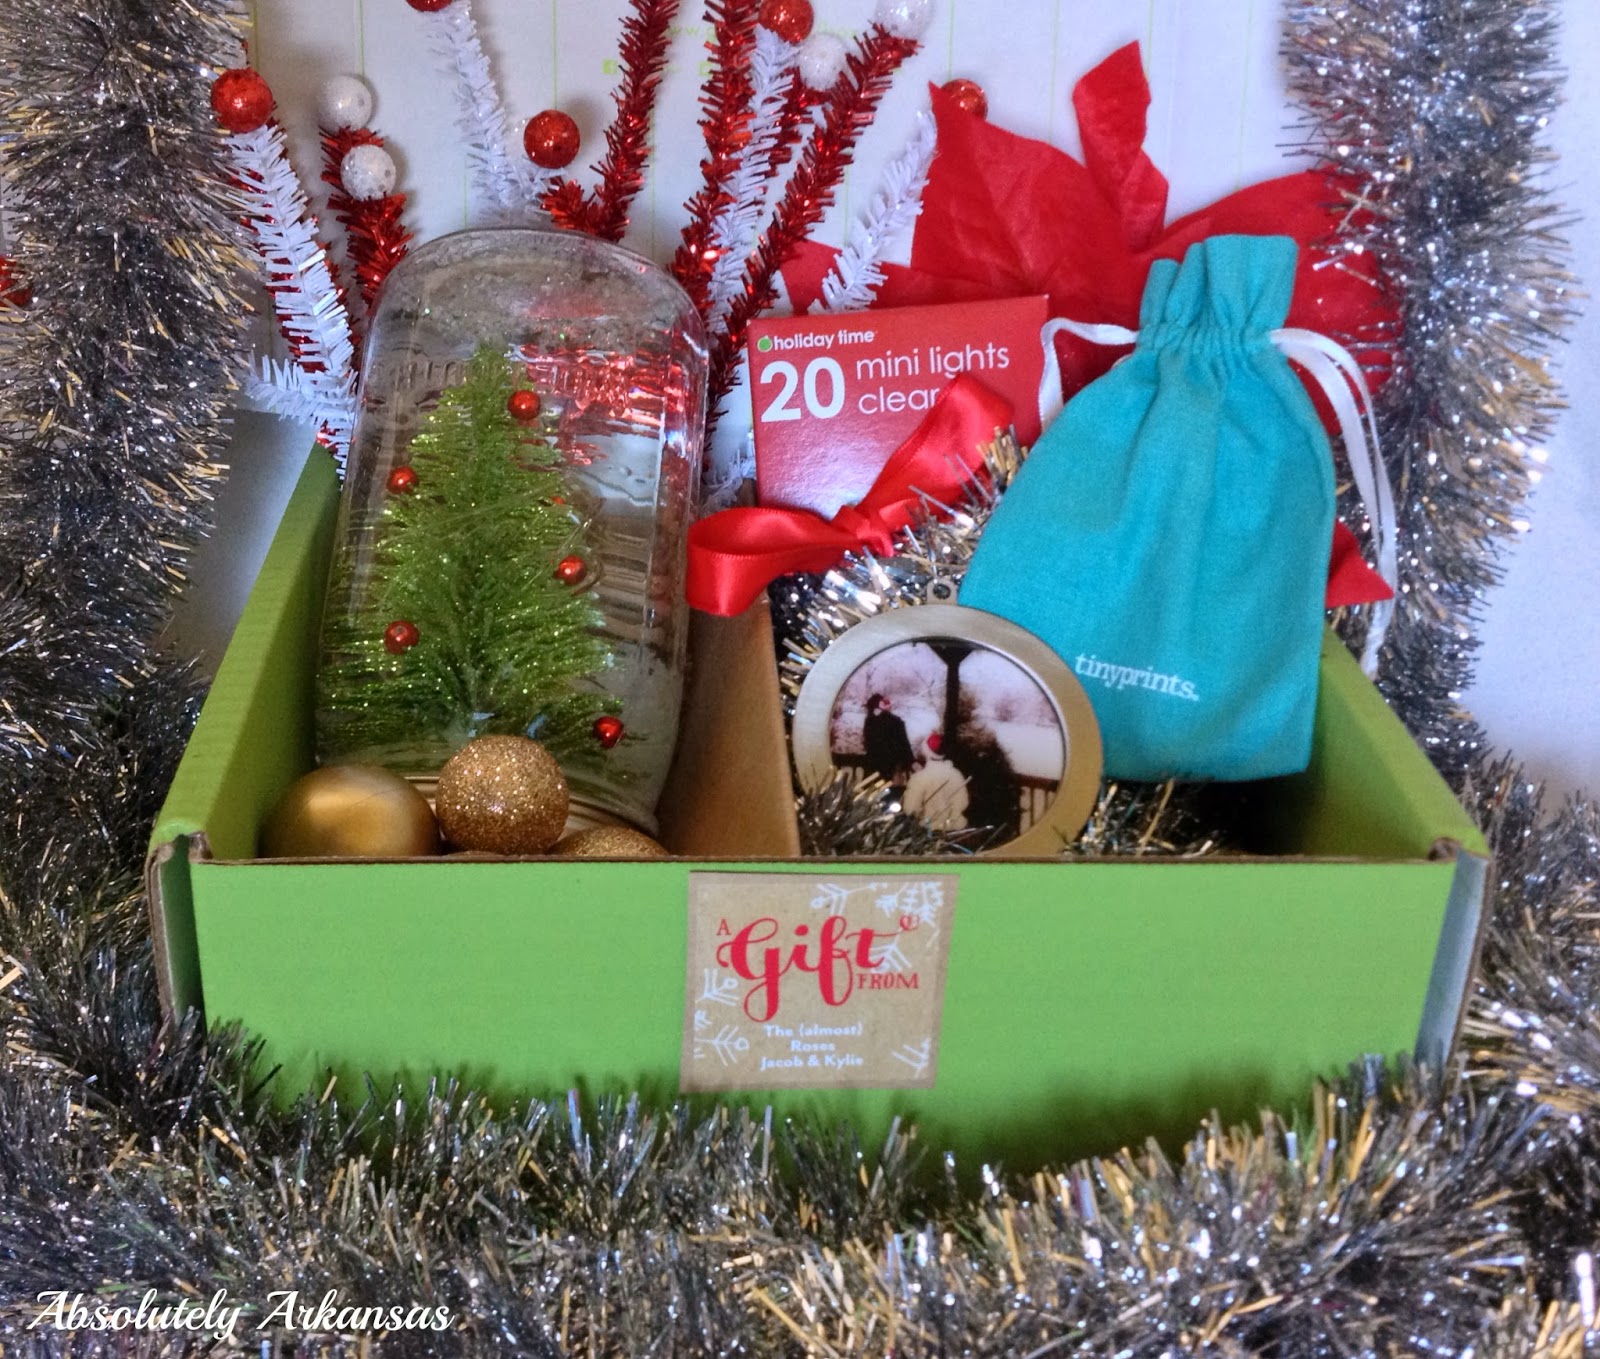 Rose & Co Blog: Christmas Tree in a Box